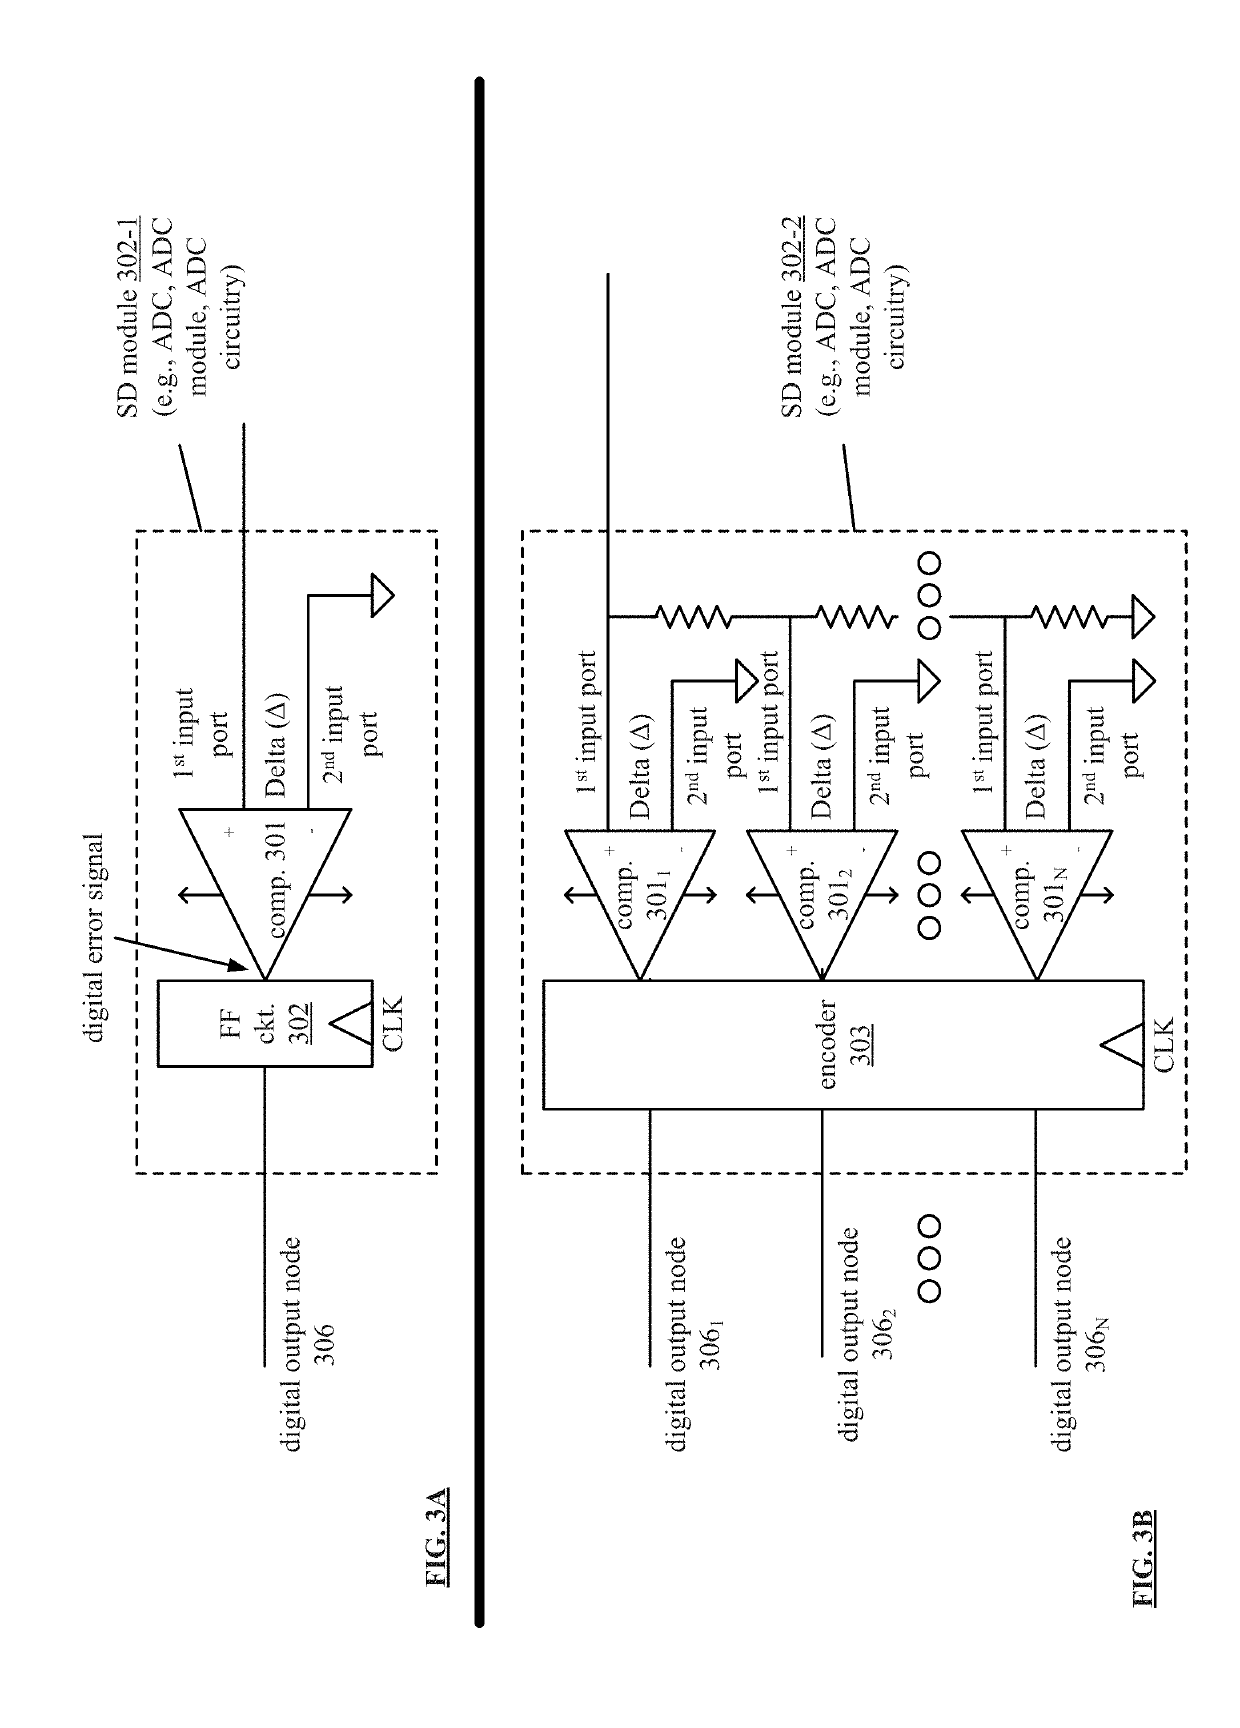 Channel Driver Circuit